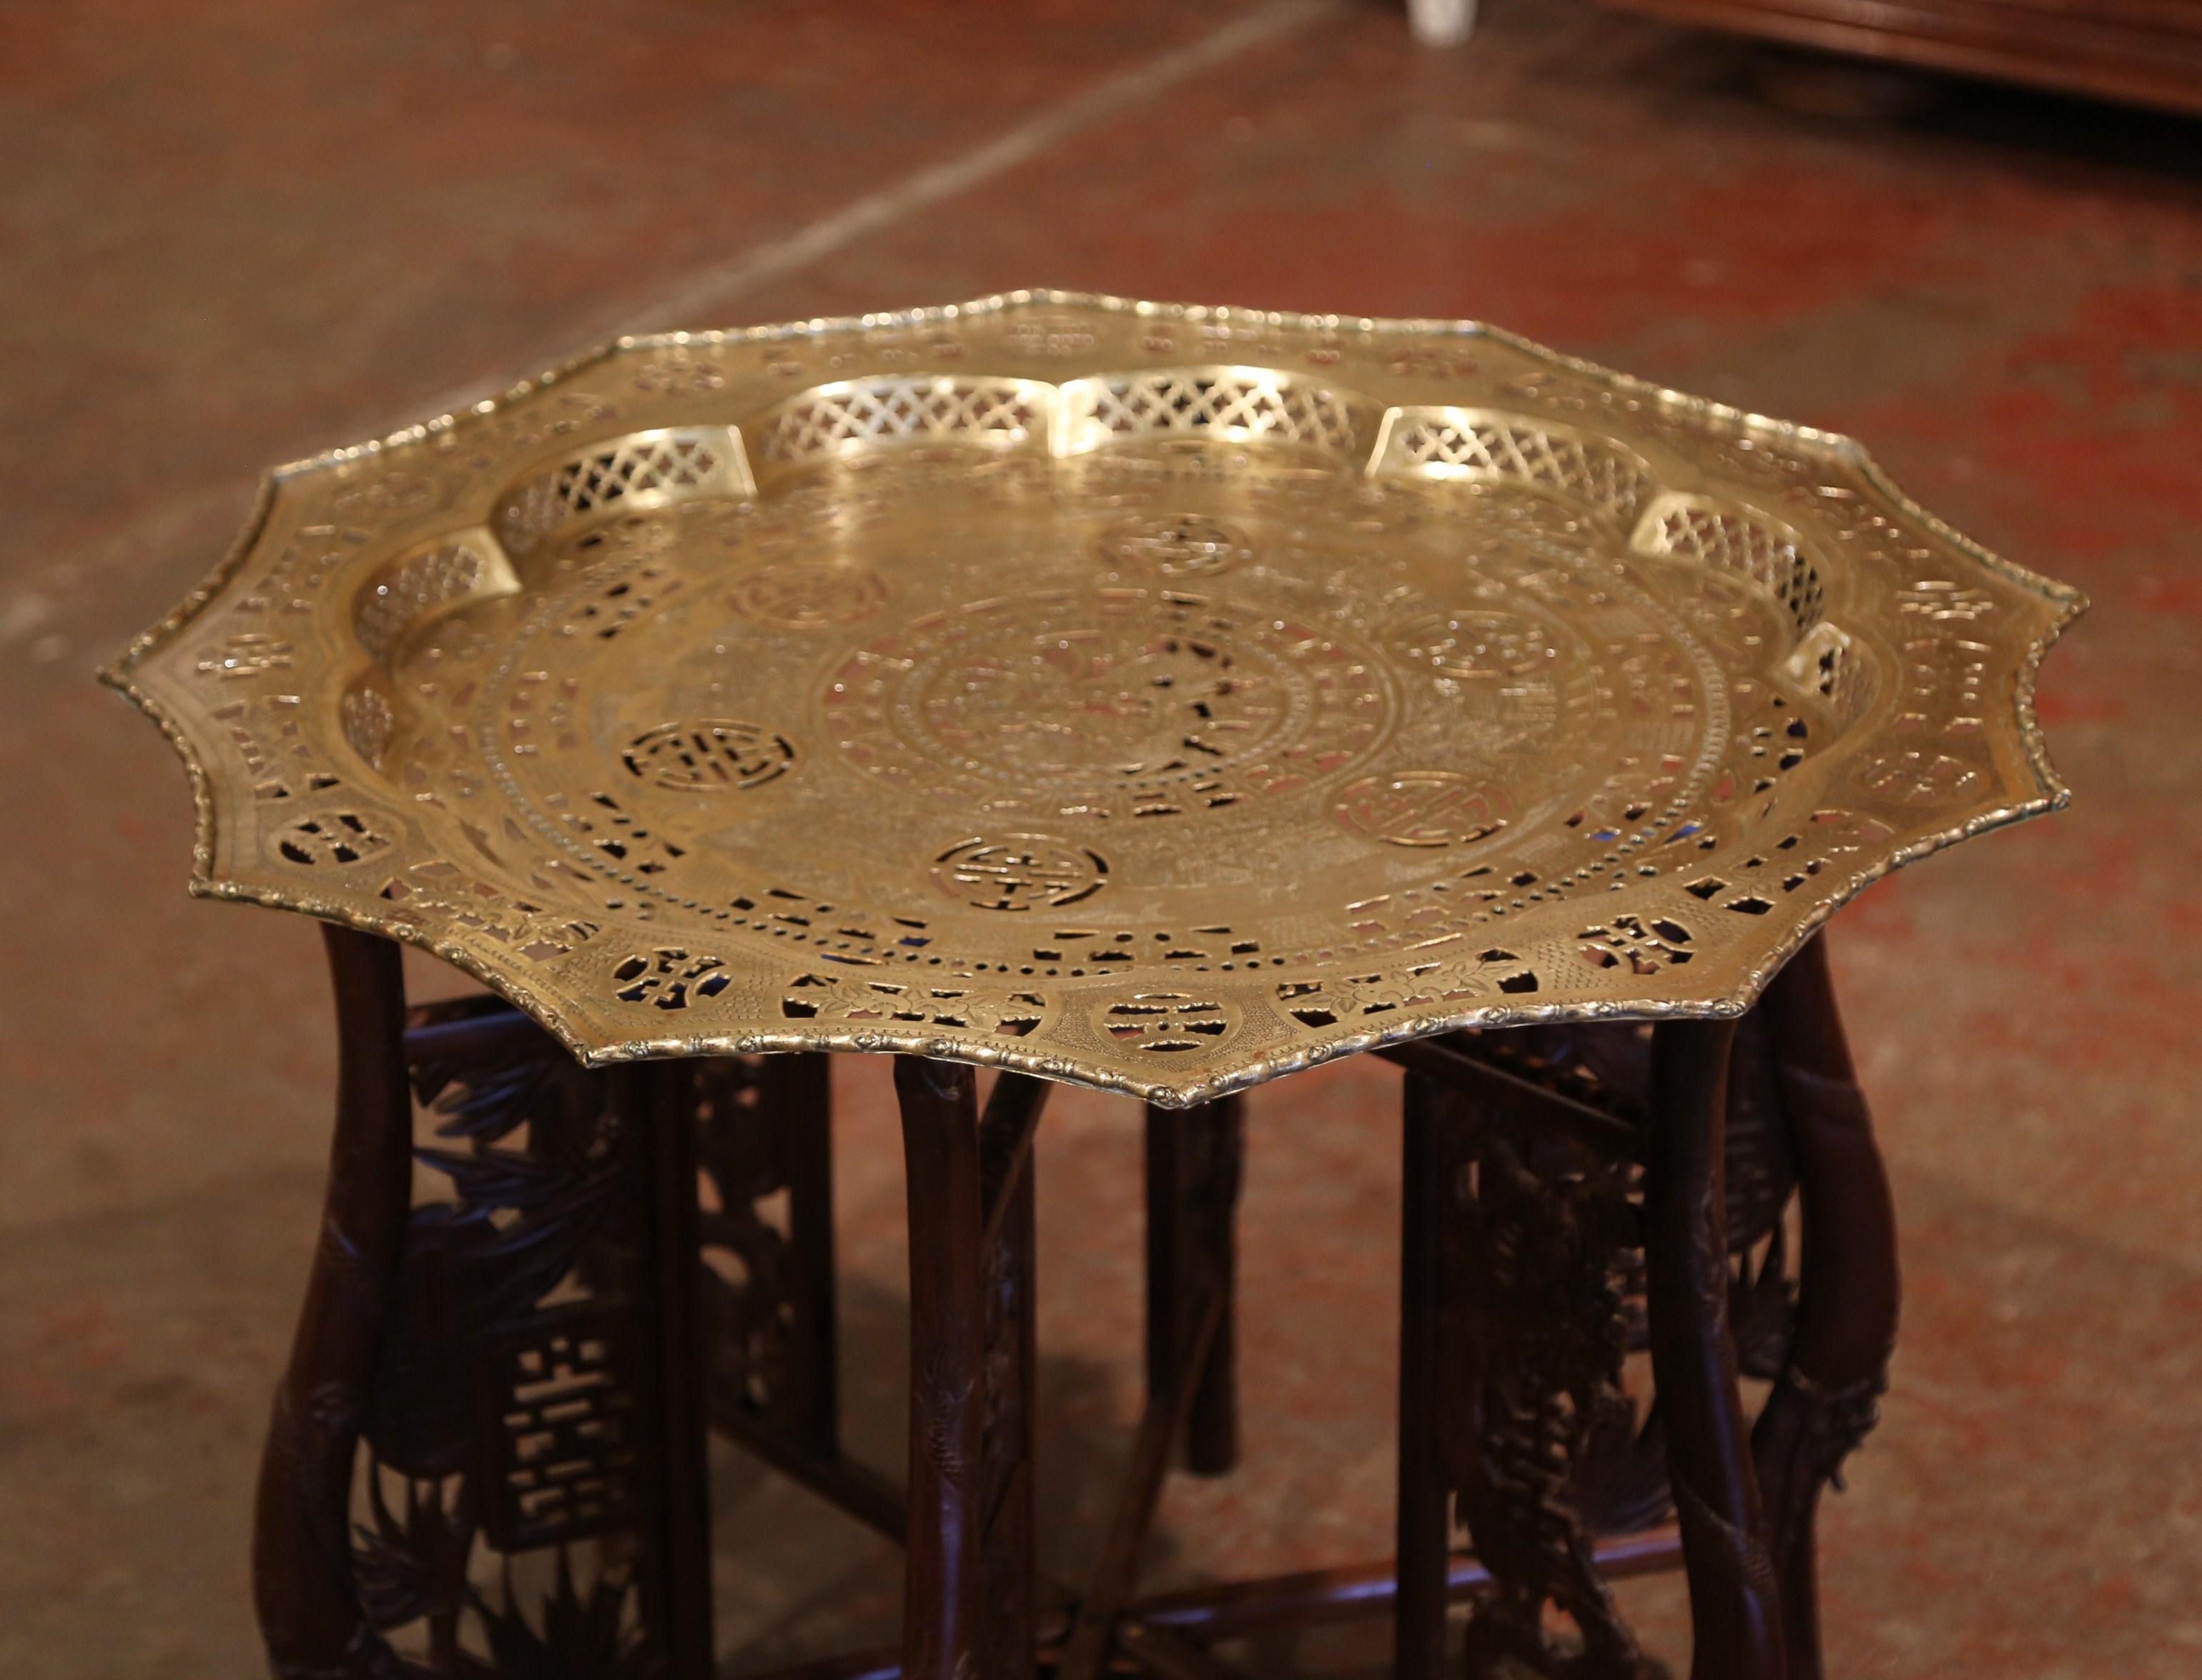 This small, versatile coffee table was crafted in China, circa 1950. The folding base with decorative supports has six carved legs which can easily be folded up flat. The brass tray plateau decorated with engraved geometric motifs has a twelve sided